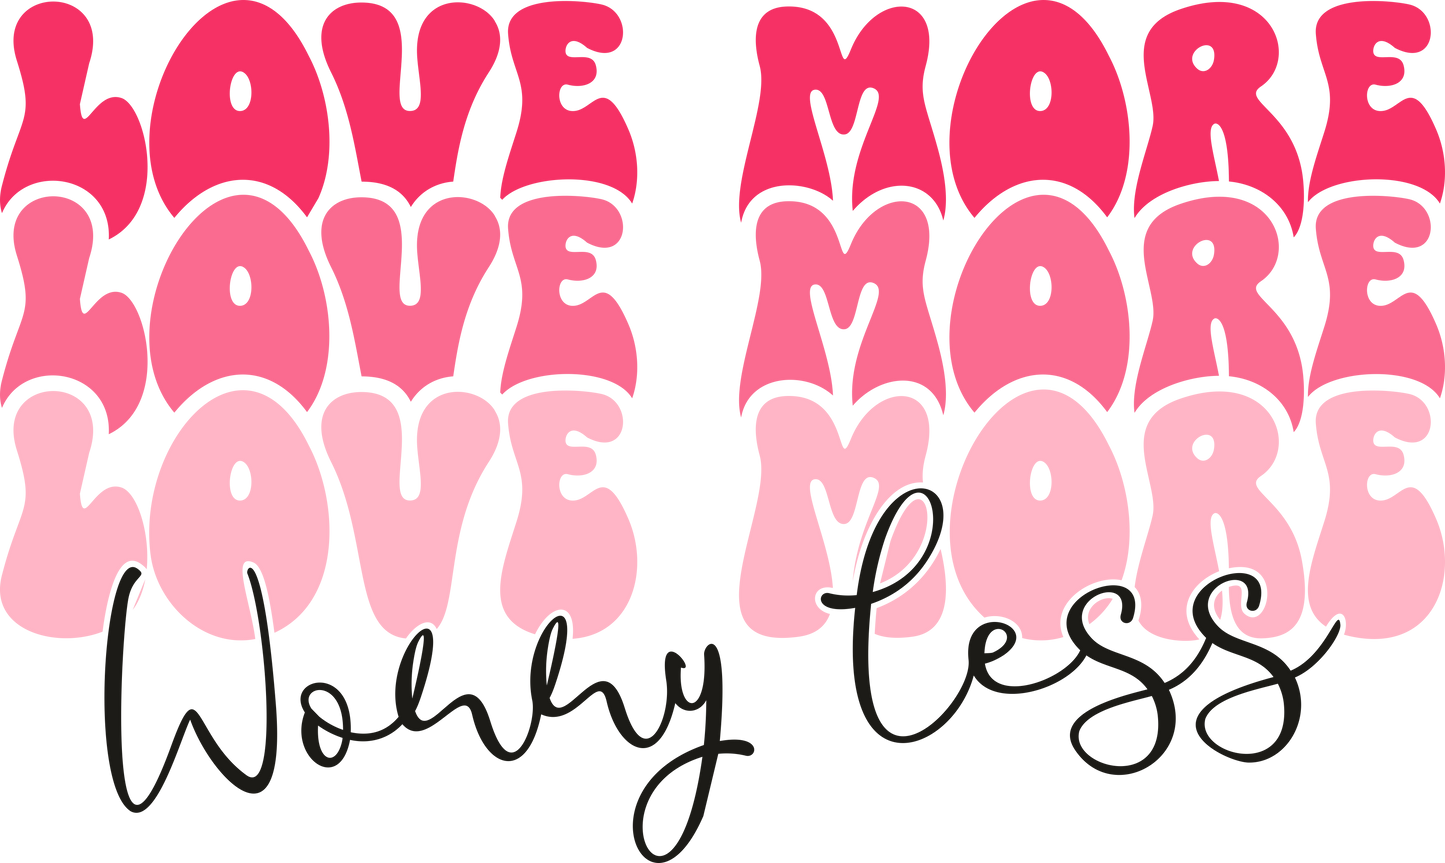 VALENTINE'S DAY PRINT 176 - love more worry less 1